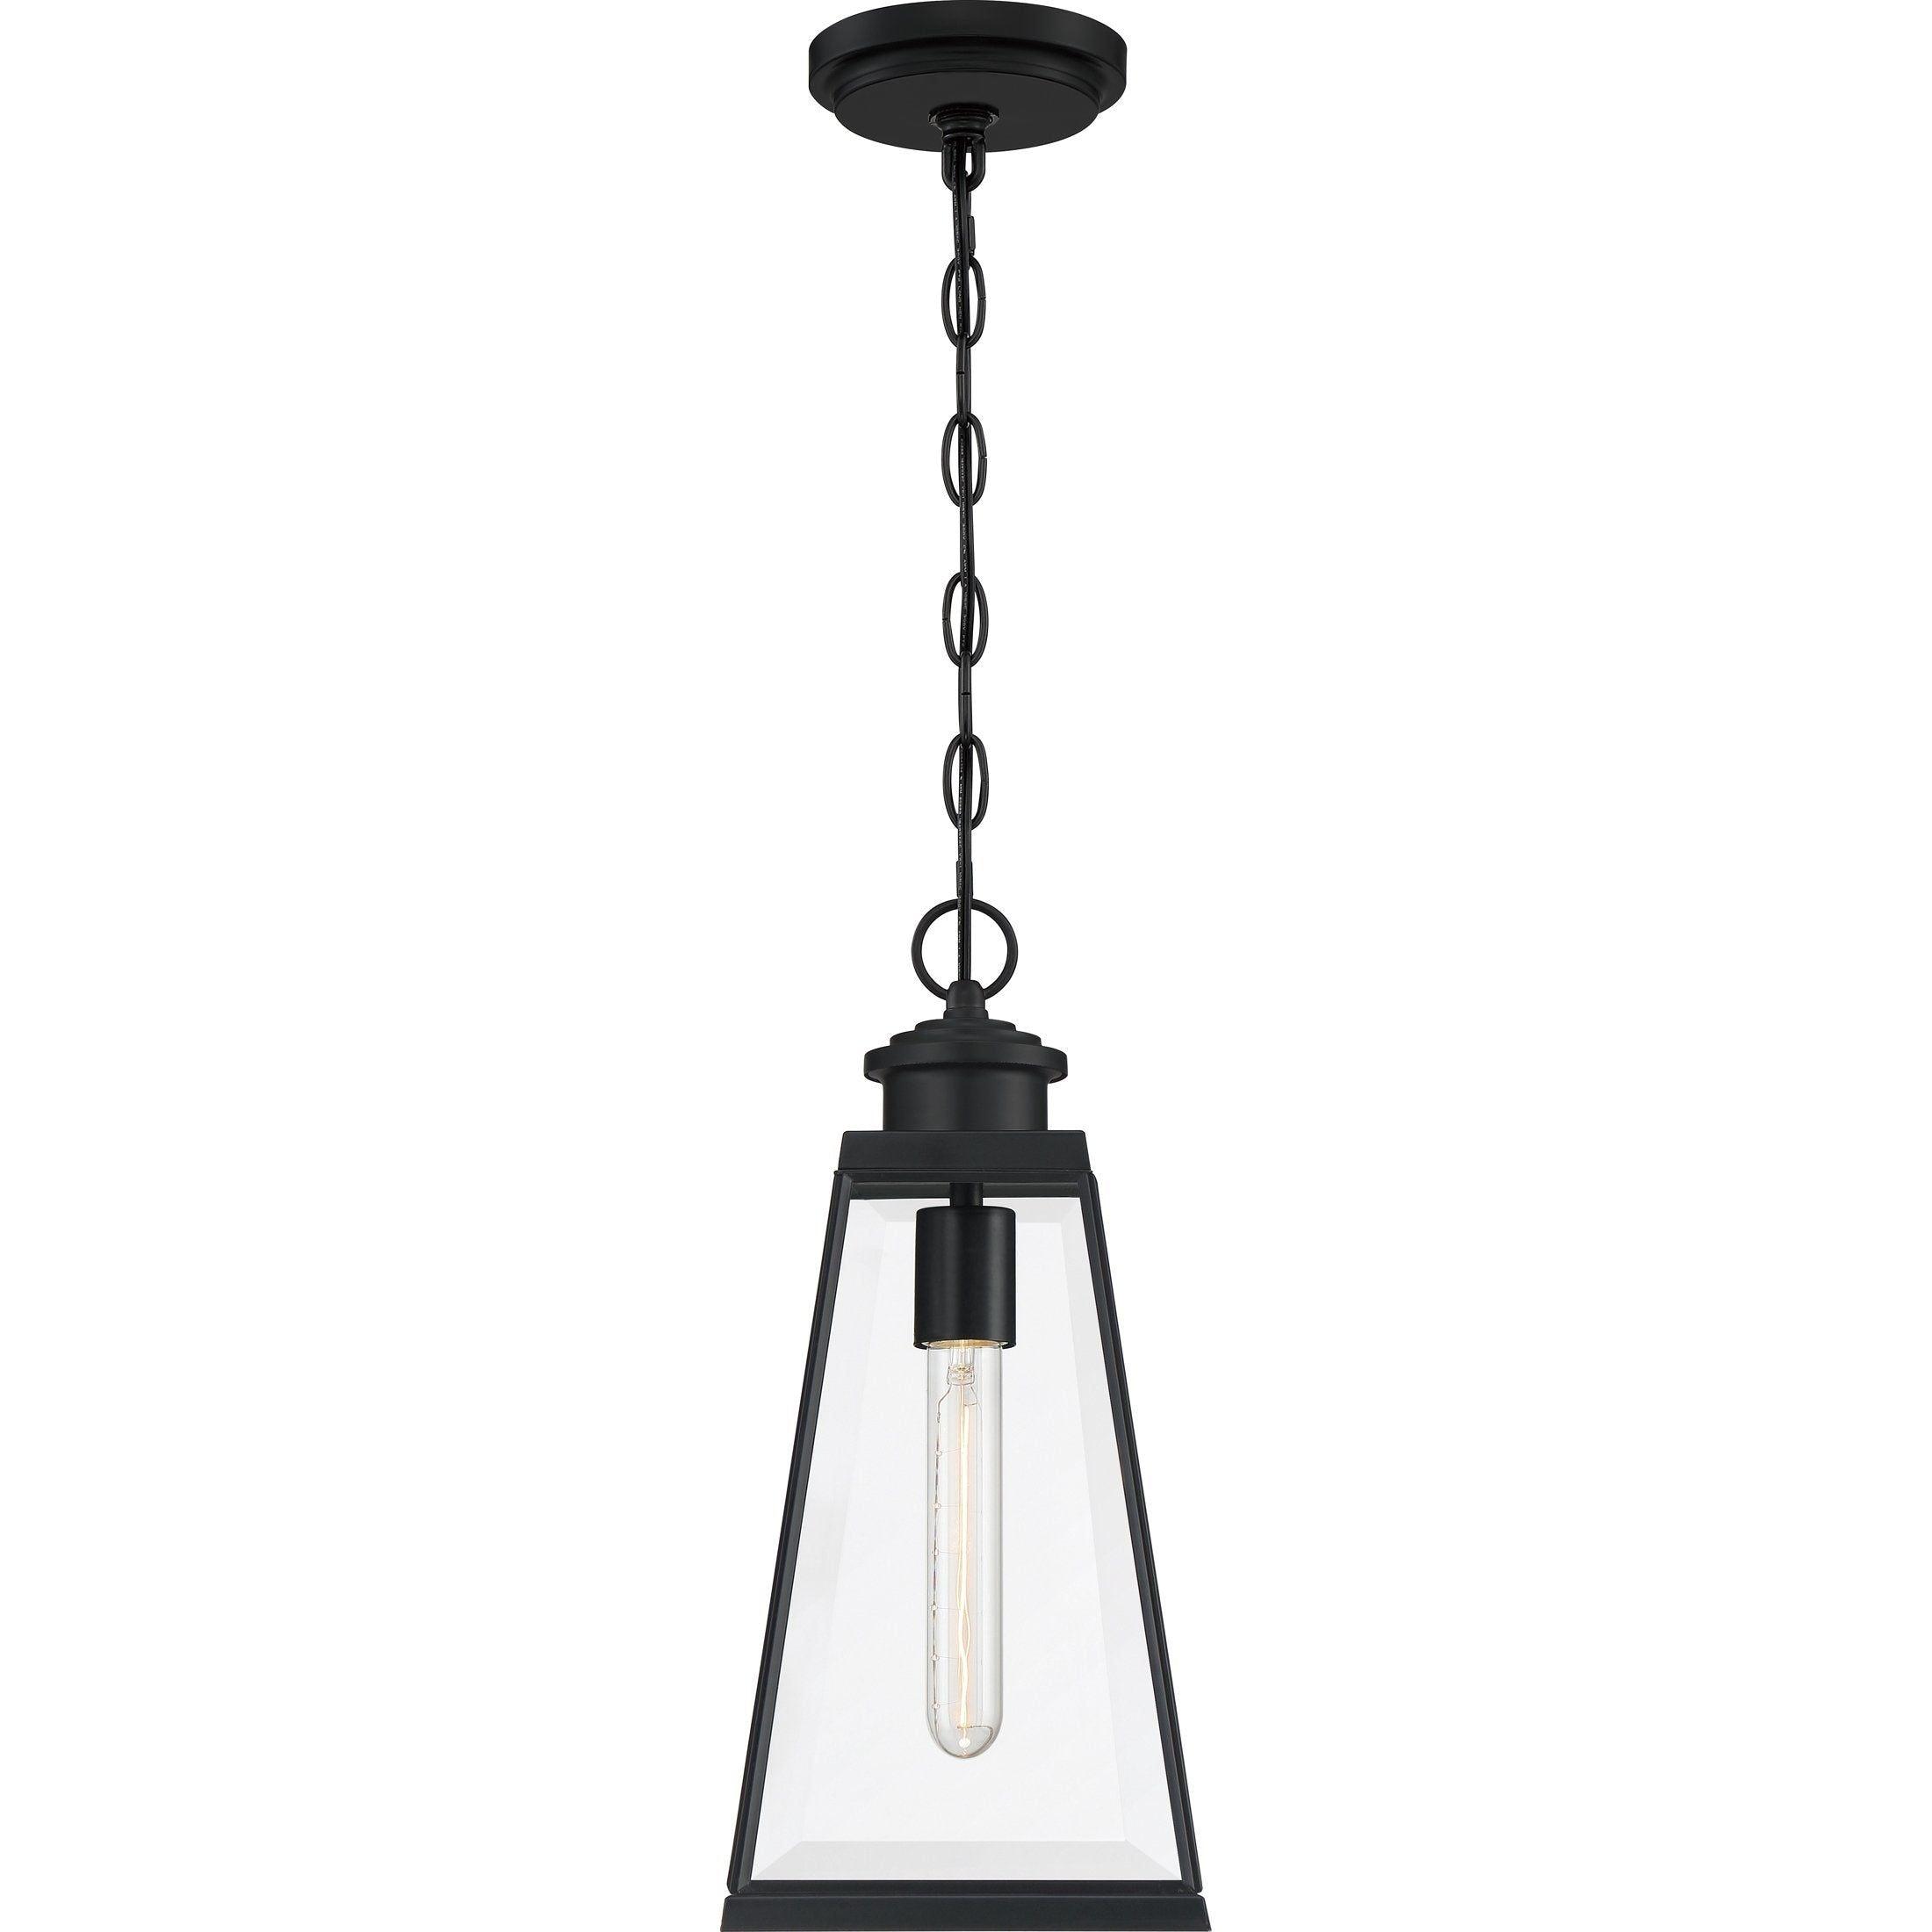 Quoizel - Paxton Outdoor Pendant - Lights Canada